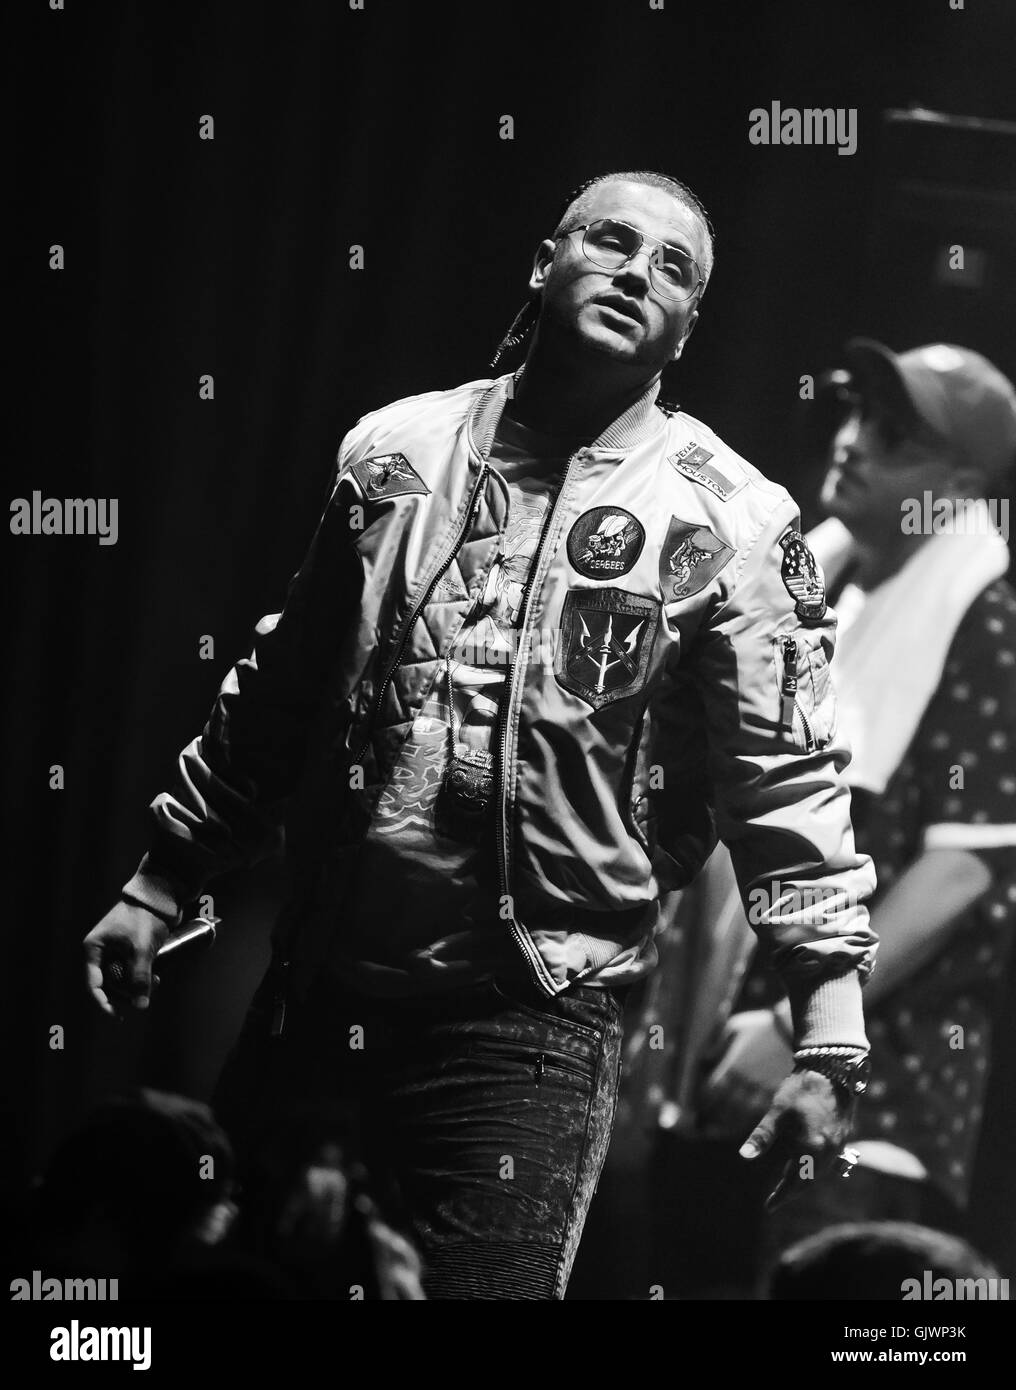 Las Vegas, NV, USA. 17th Aug, 2016. ***HOUSE COVERAGE*** Horst Christian Simco AKA RIFF RAFF performs at Brooklyn Bowl at The Linq in Las vegas, NV on August 17, 2016. Credit:  Erik Kabik Photography/Media Punch/Alamy Live News Stock Photo